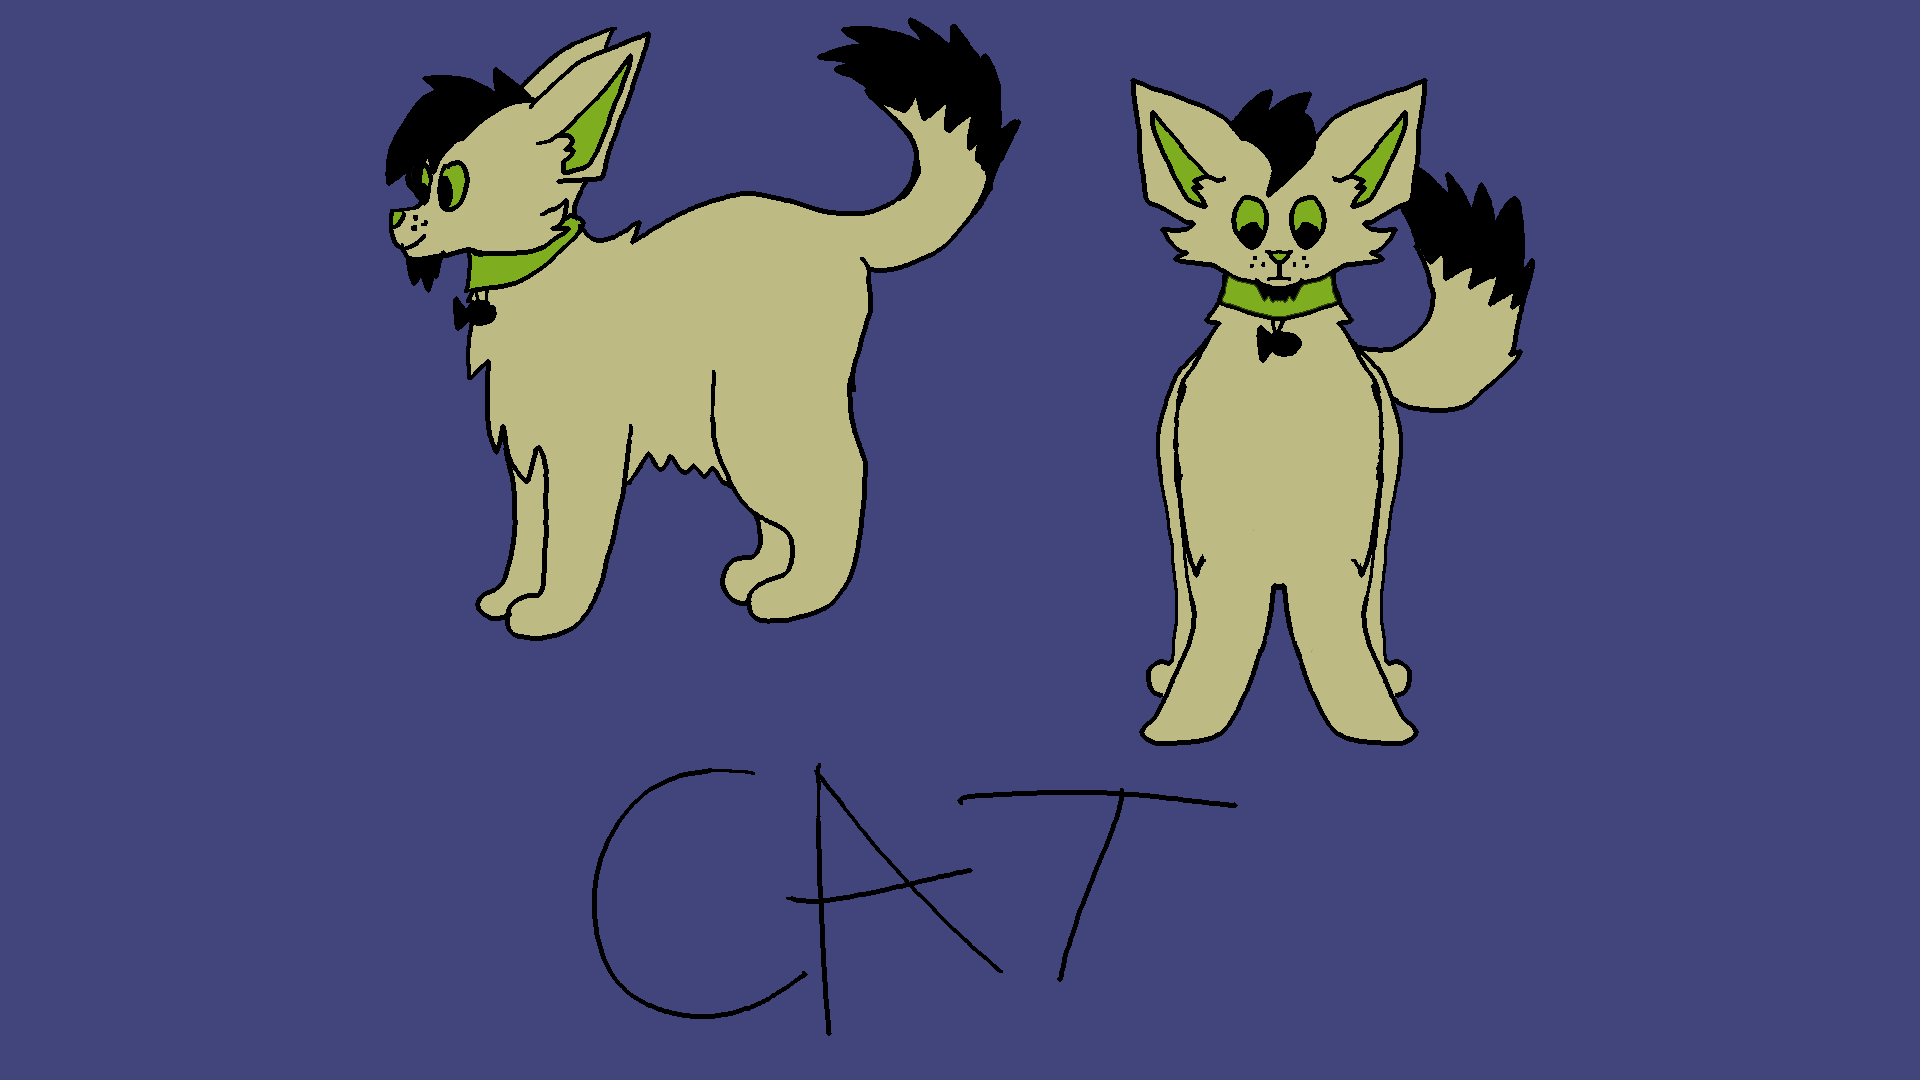 Sandy-colored cartoon cat with black hair and green collar